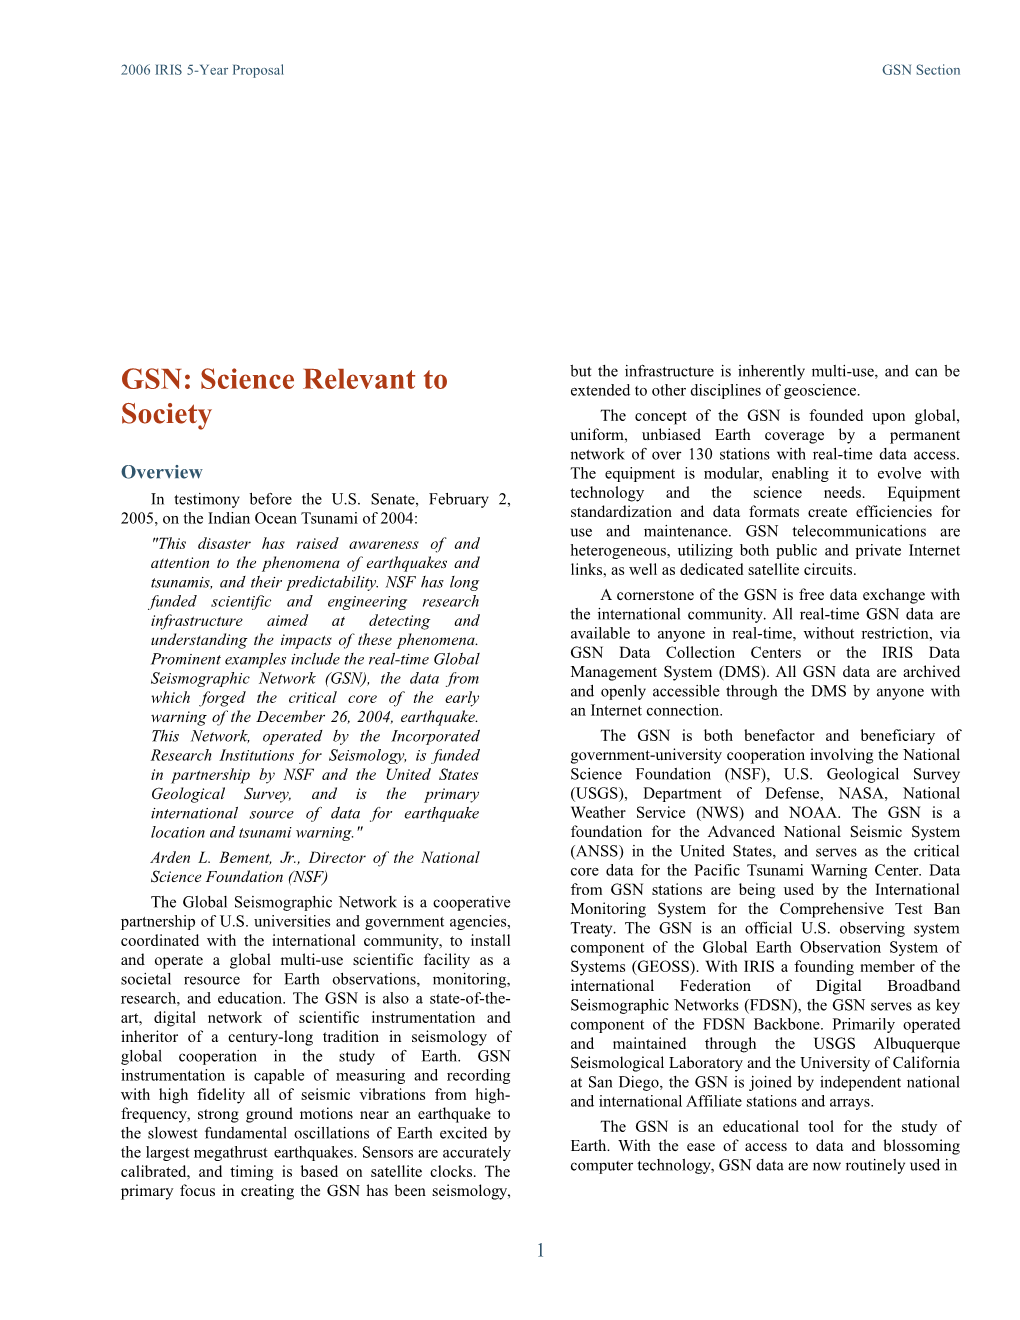 GSN: Science Relevant to Society